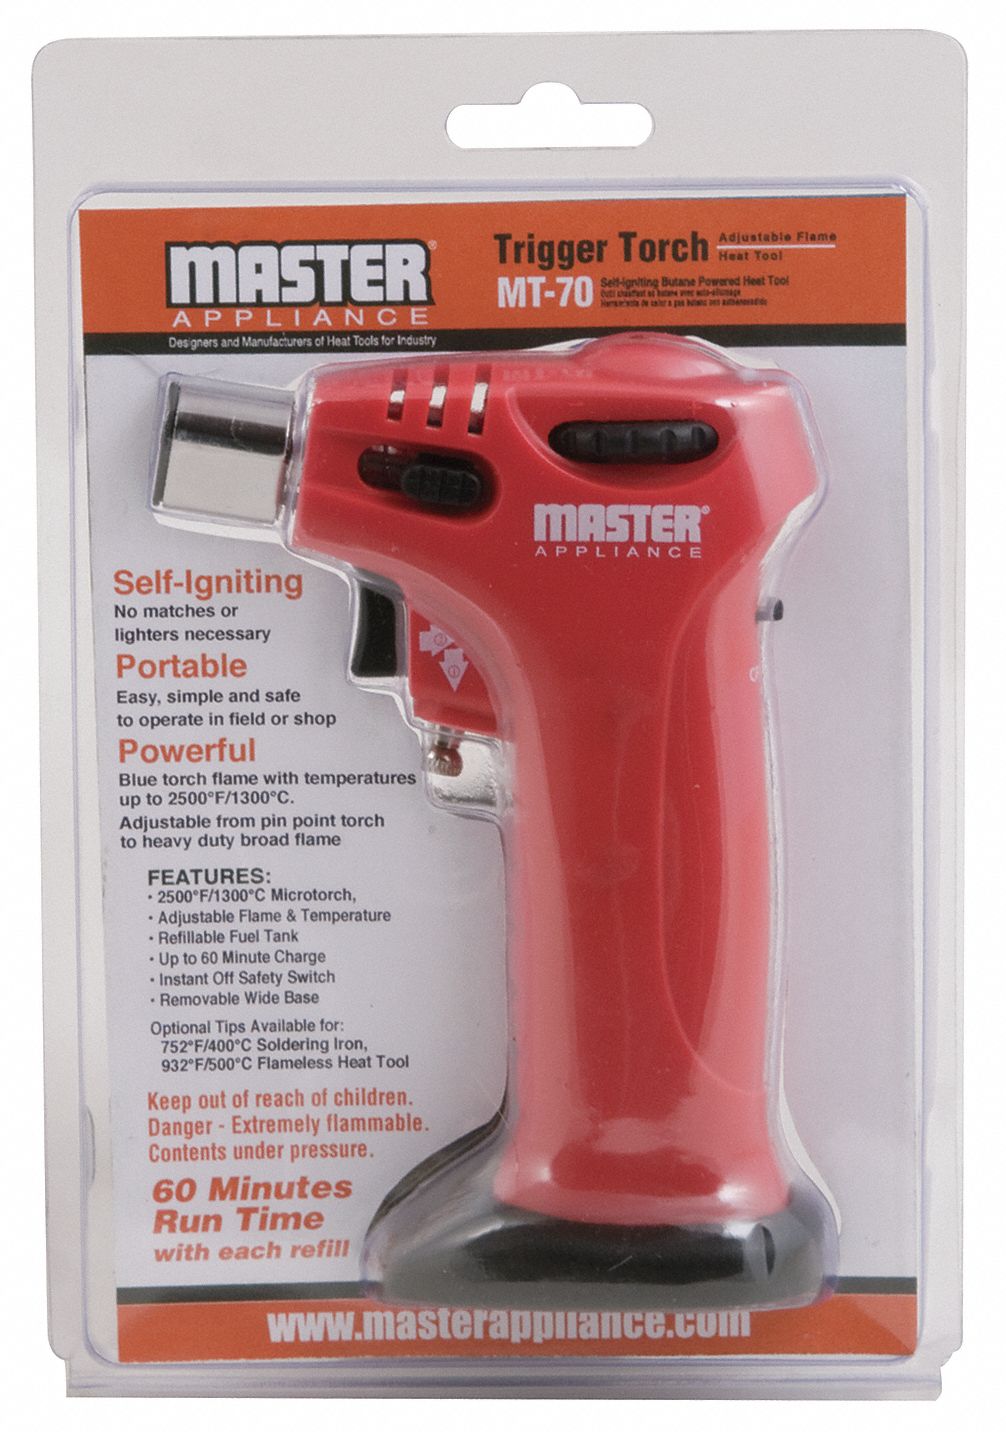 MASTER APPLIANCE MT70 - Triggertorch Palm Sized